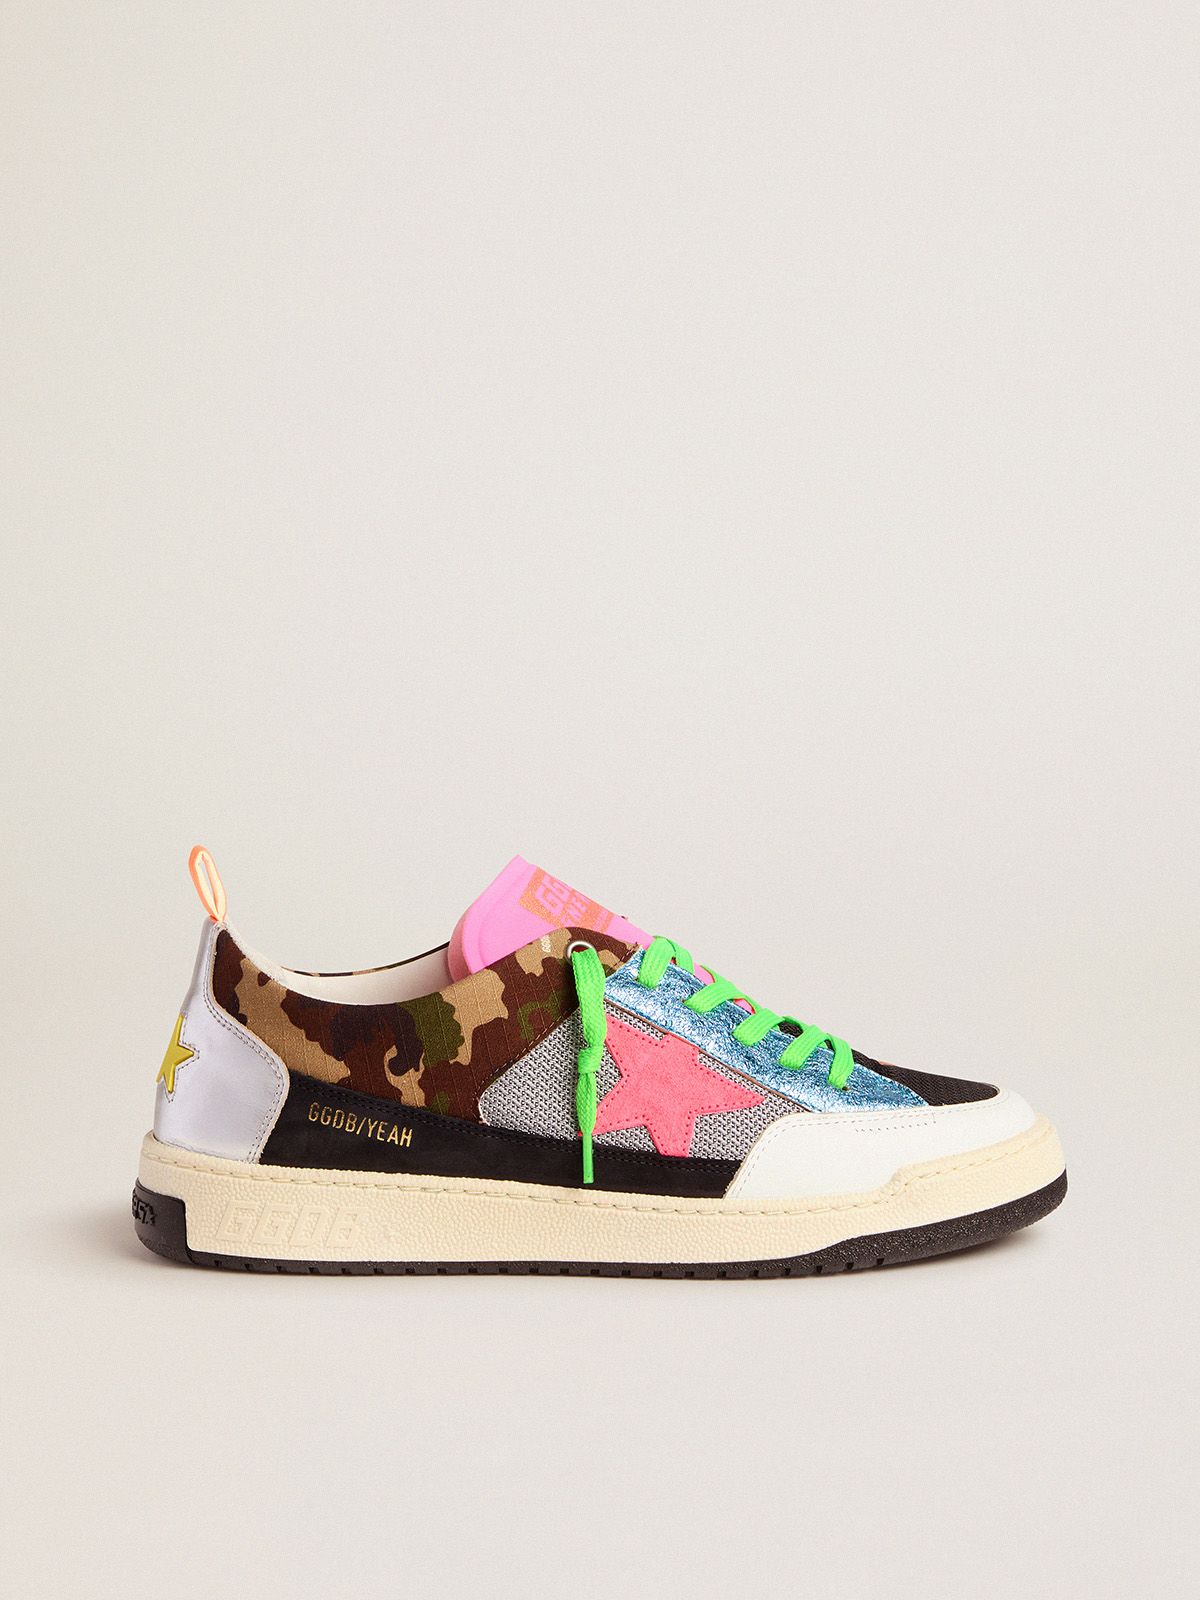 golden goose camouflage star fuchsia Men’s Yeah sneakers with